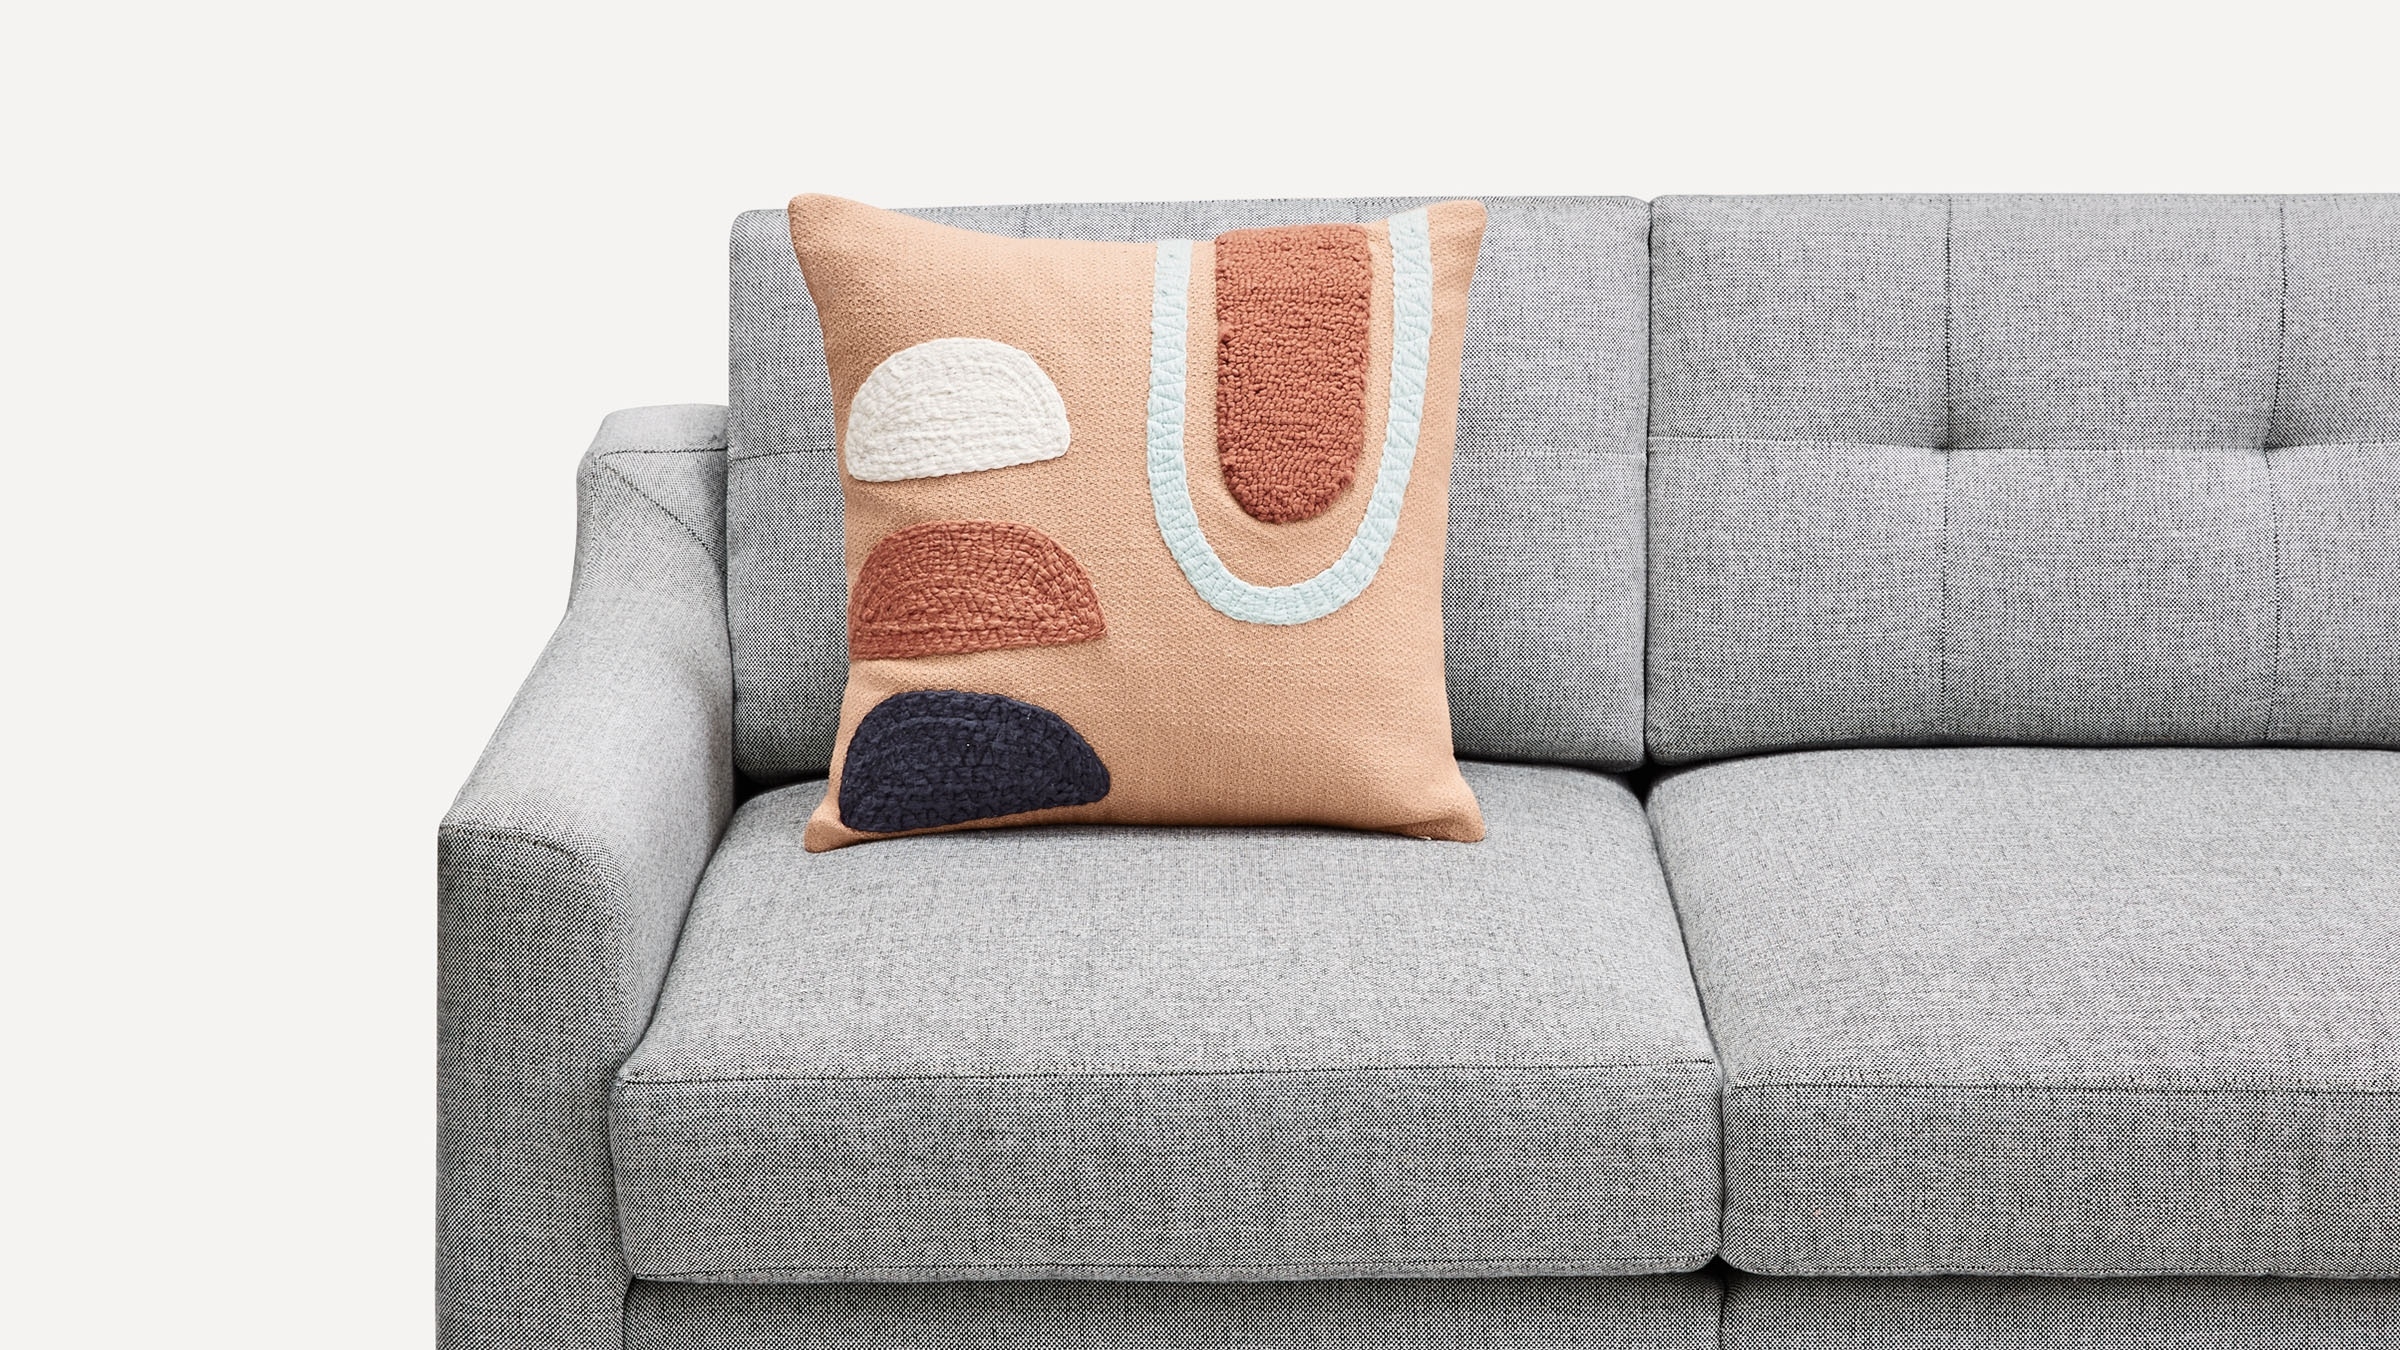 Embroidered Adobe Clay Pillow Cover - Image 1